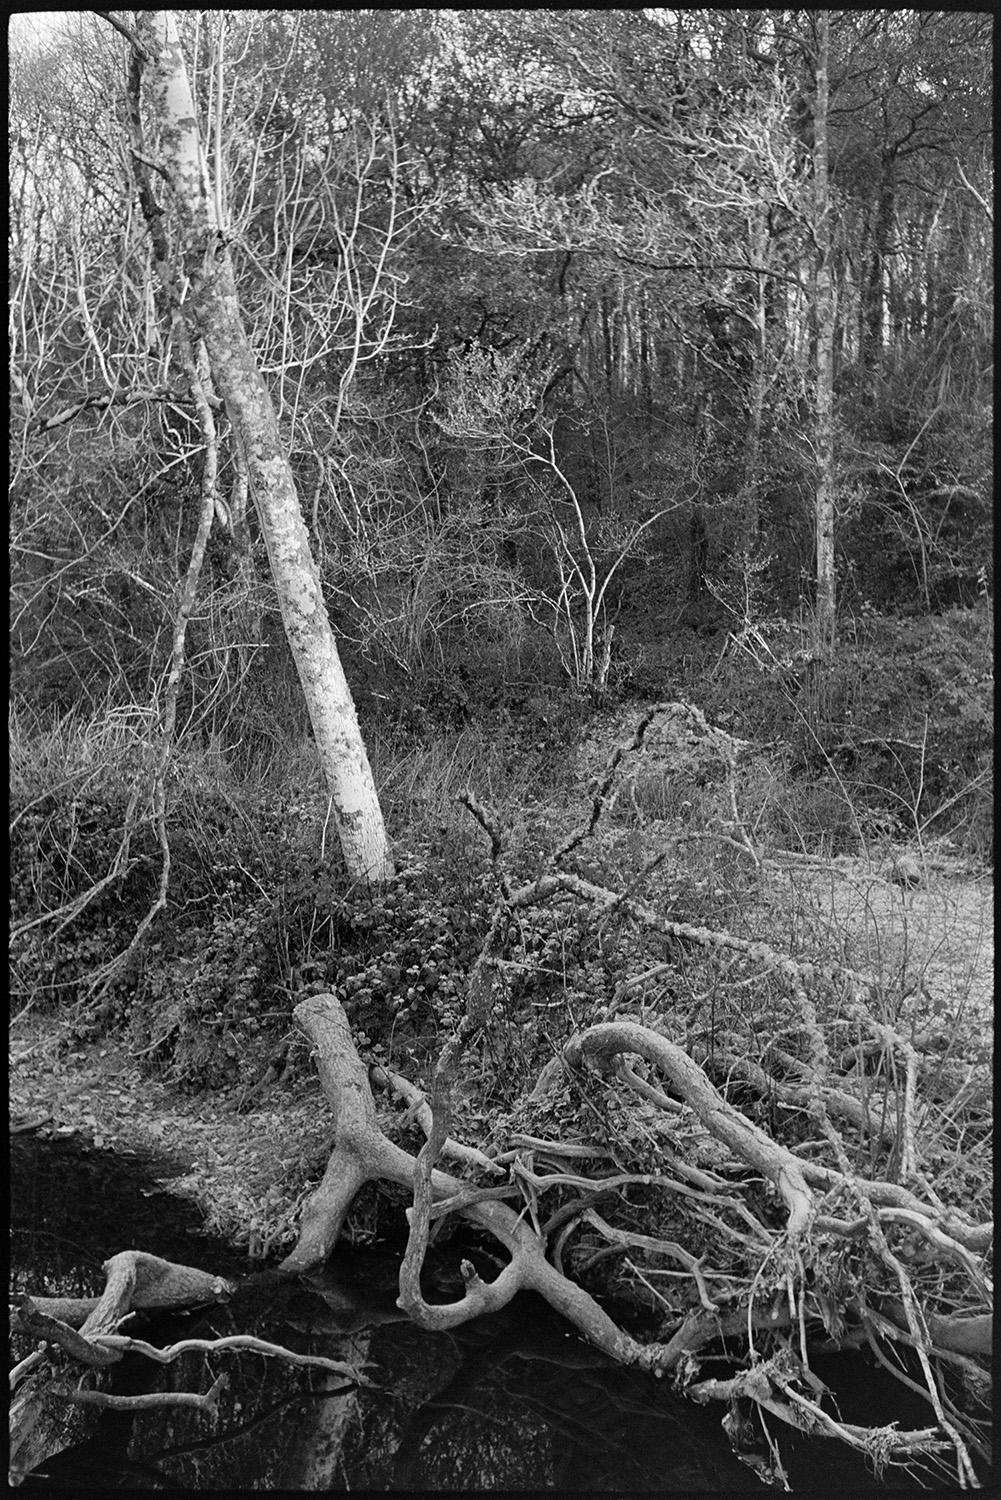 Woods with tree roots at edge of stream. 
[Tree roots extending into a stream at Brookland, Chulmleigh. Woodland can be seen in the background.]